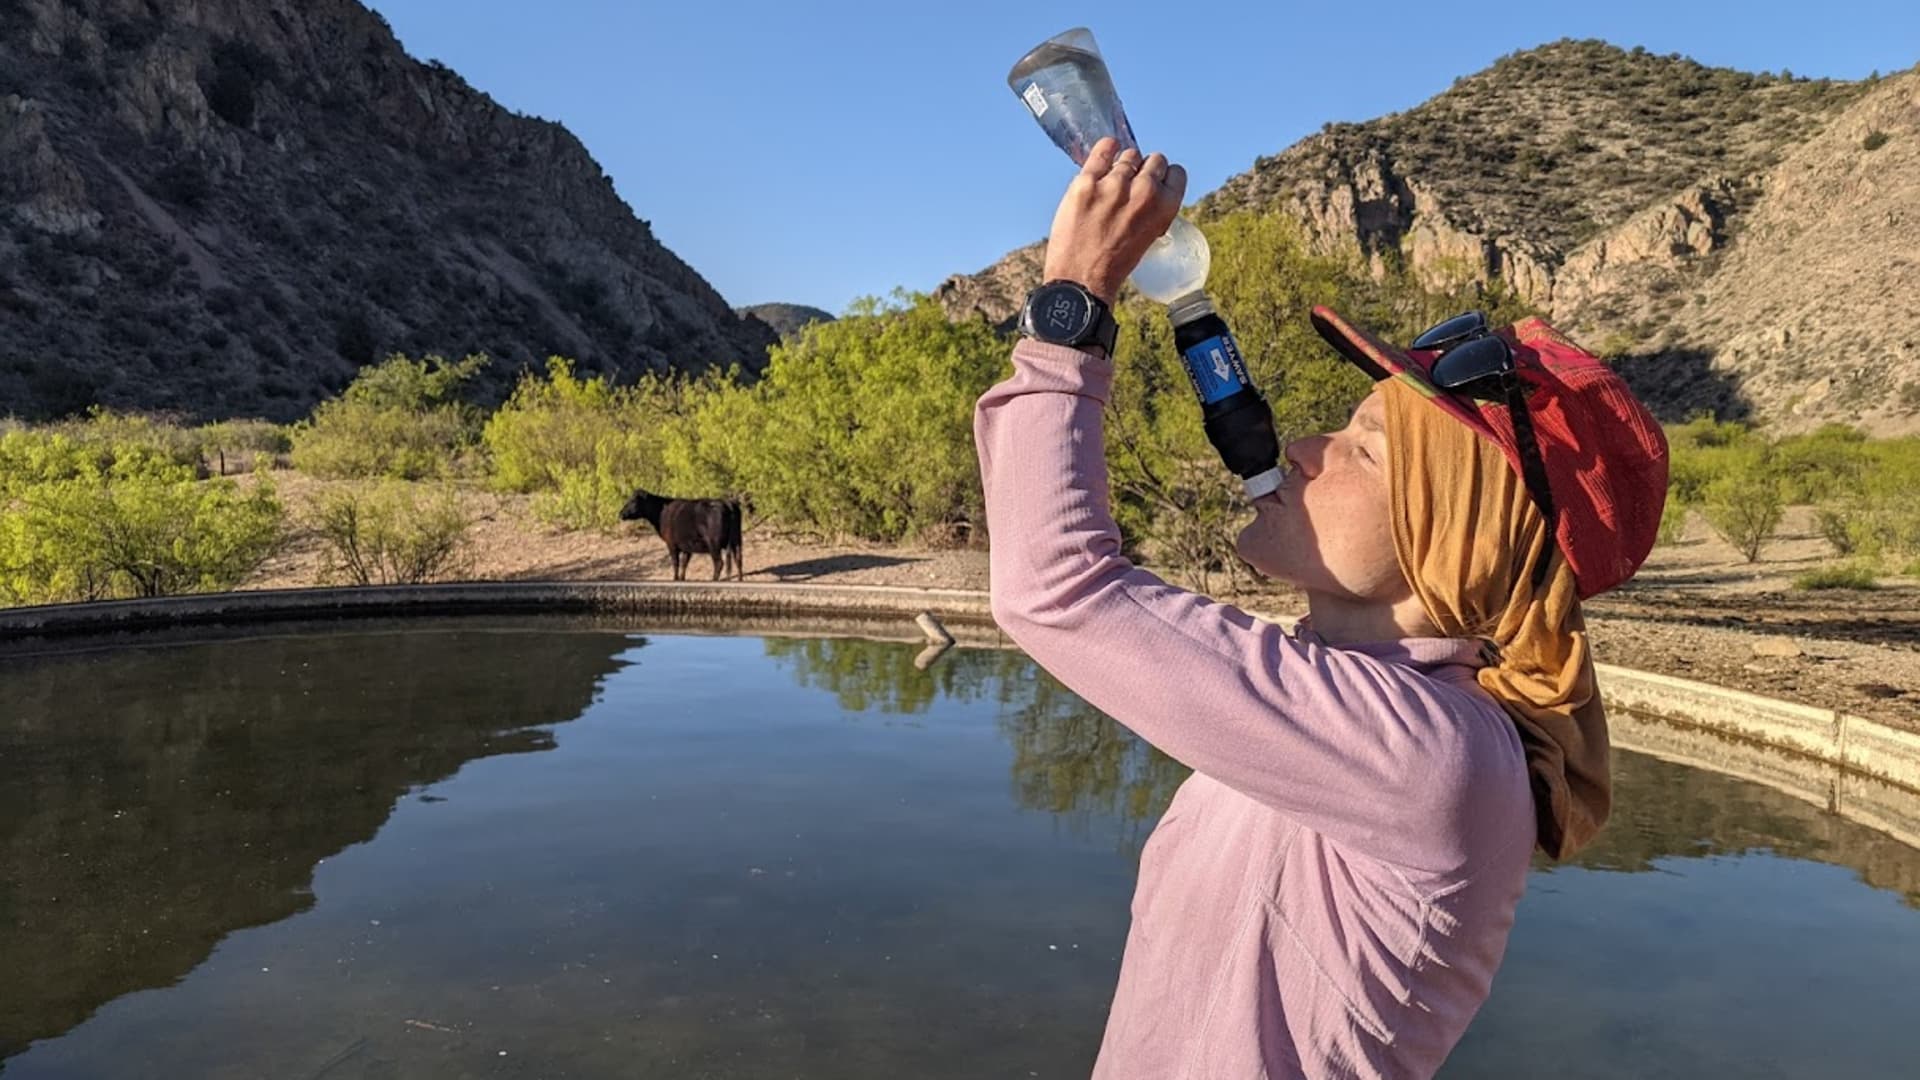 The couple reused disposable water bottles throughout their hike since they weigh less than aluminum bottles.